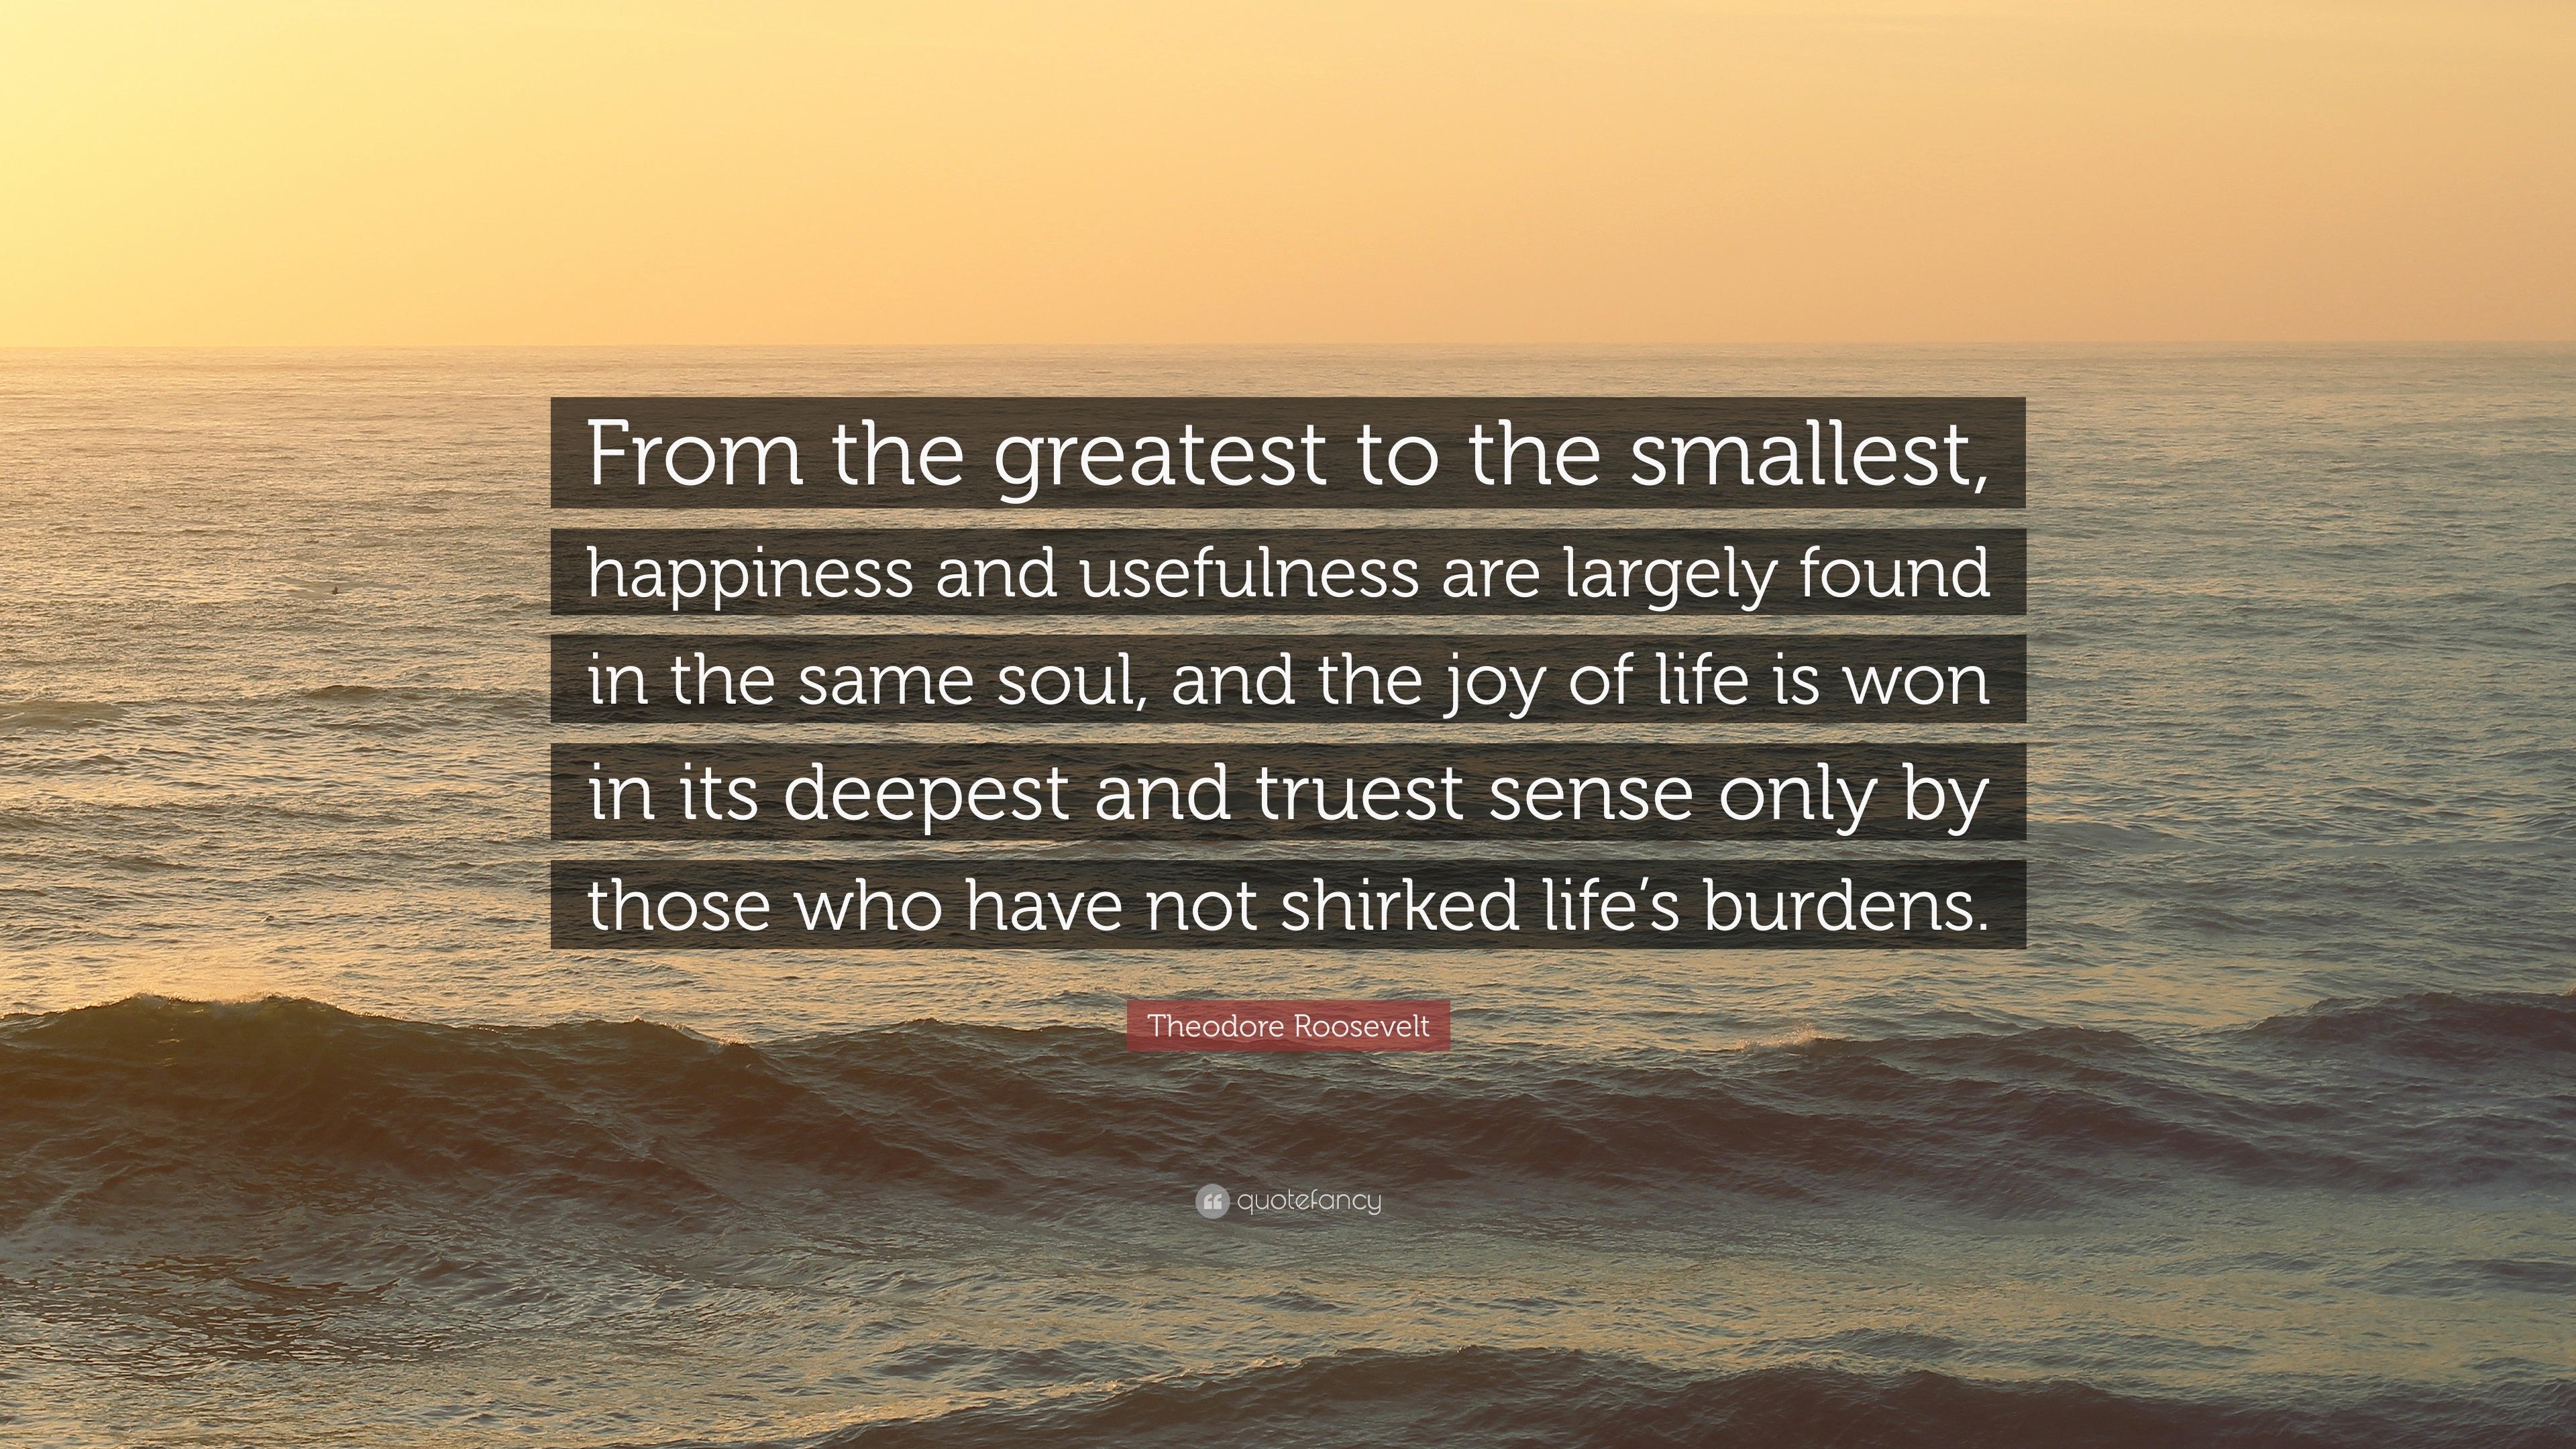 Theodore Roosevelt Quote: “From the greatest to the smallest, happiness ...